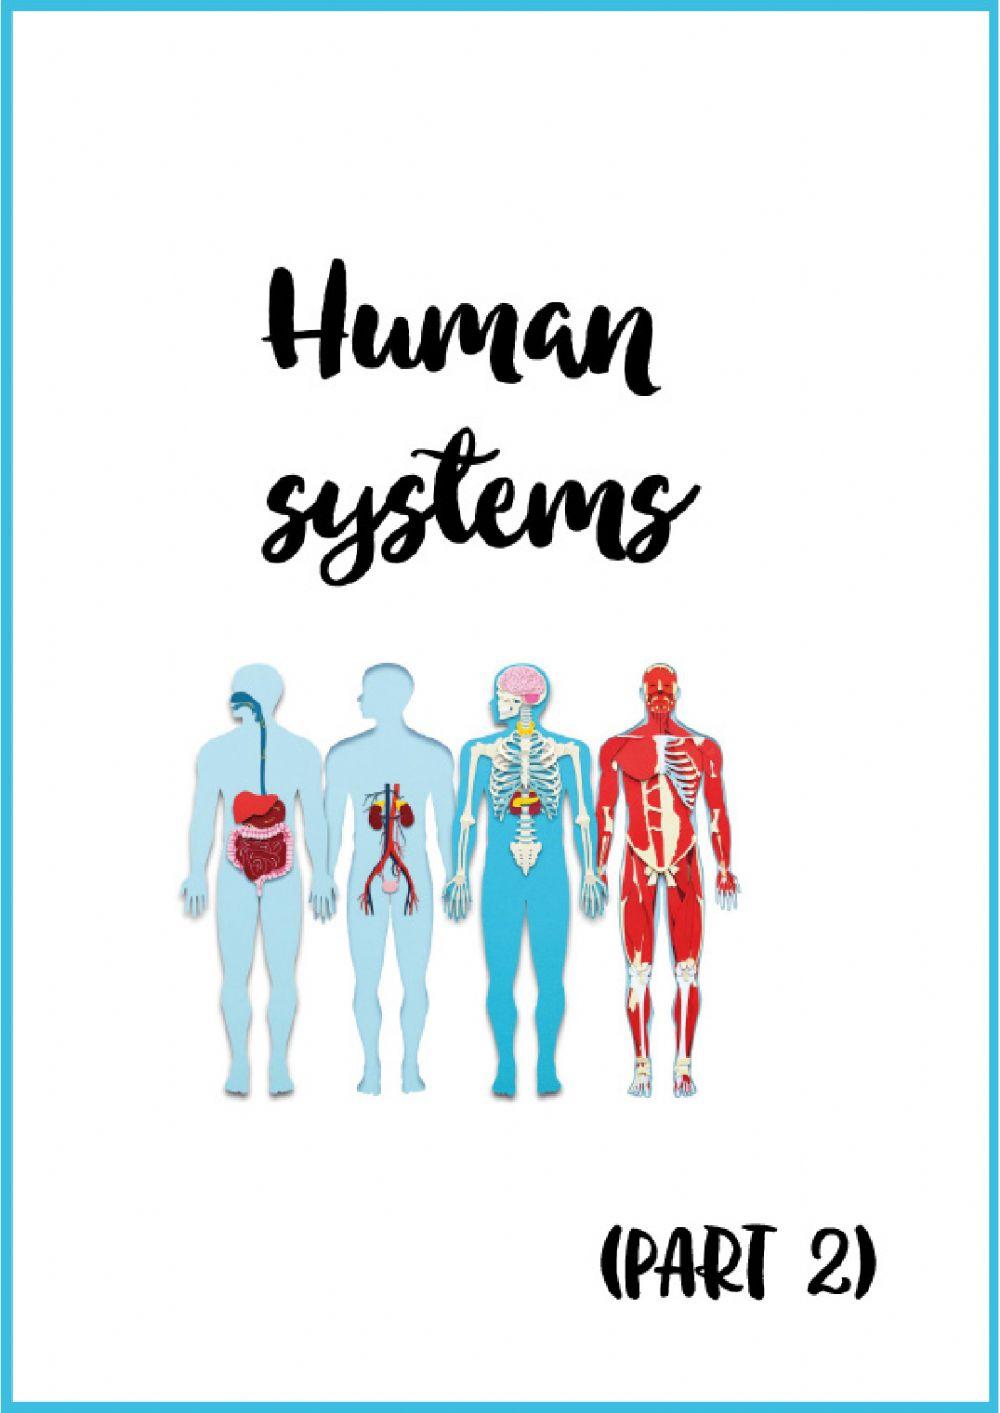 Human systems part 2